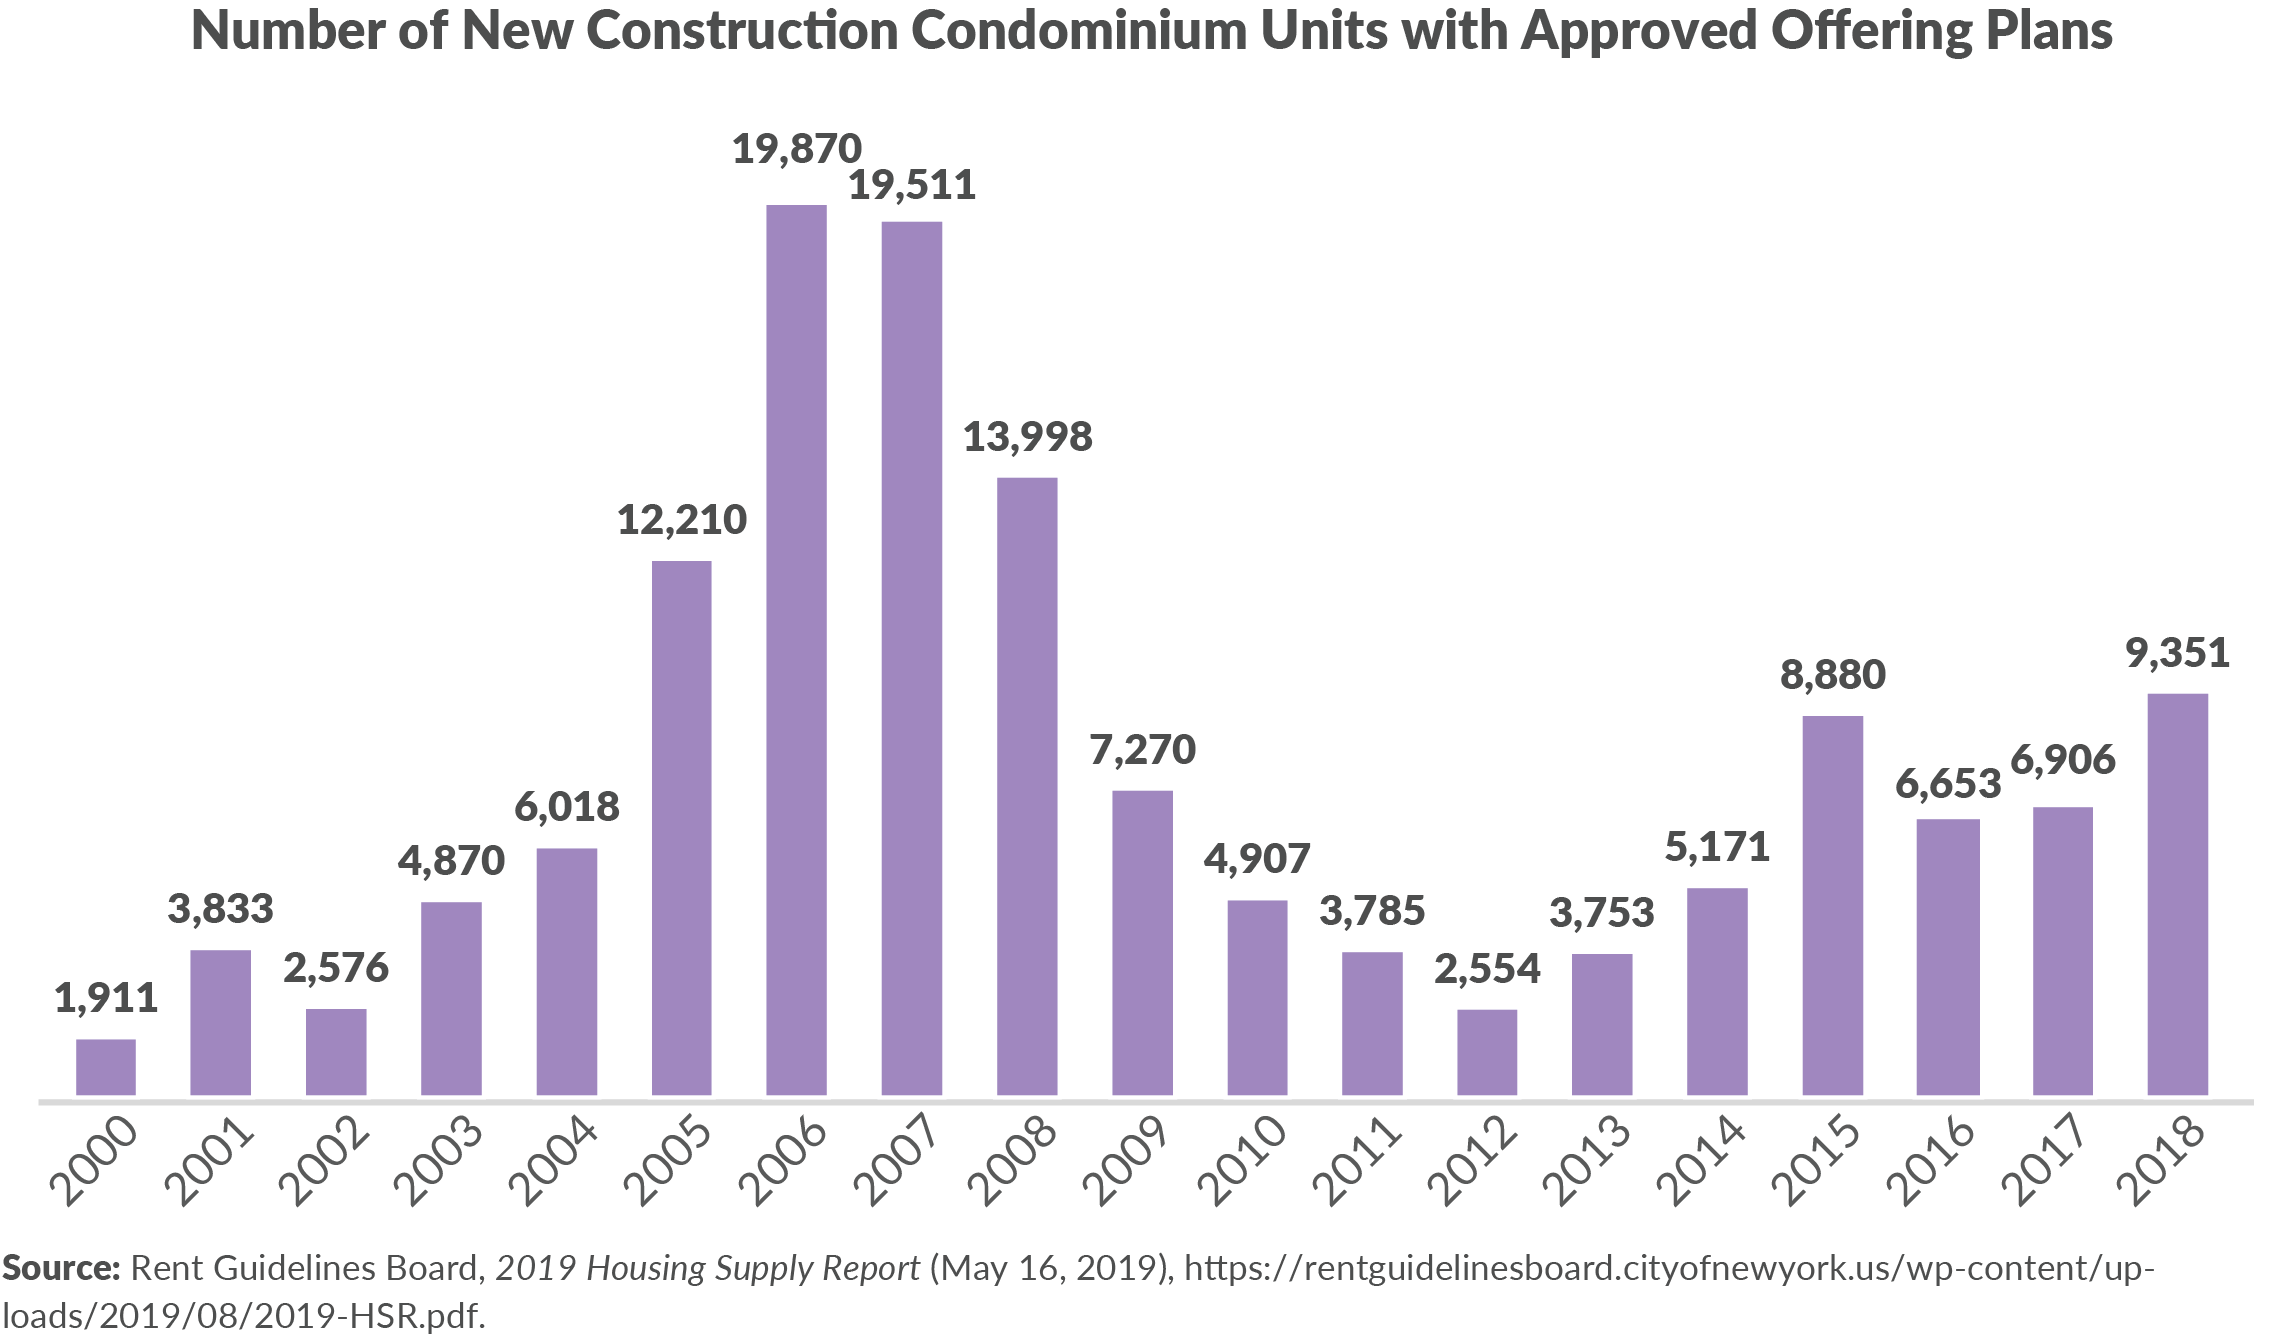 Number of New Construction Condominium Units with Approved Offering Plans